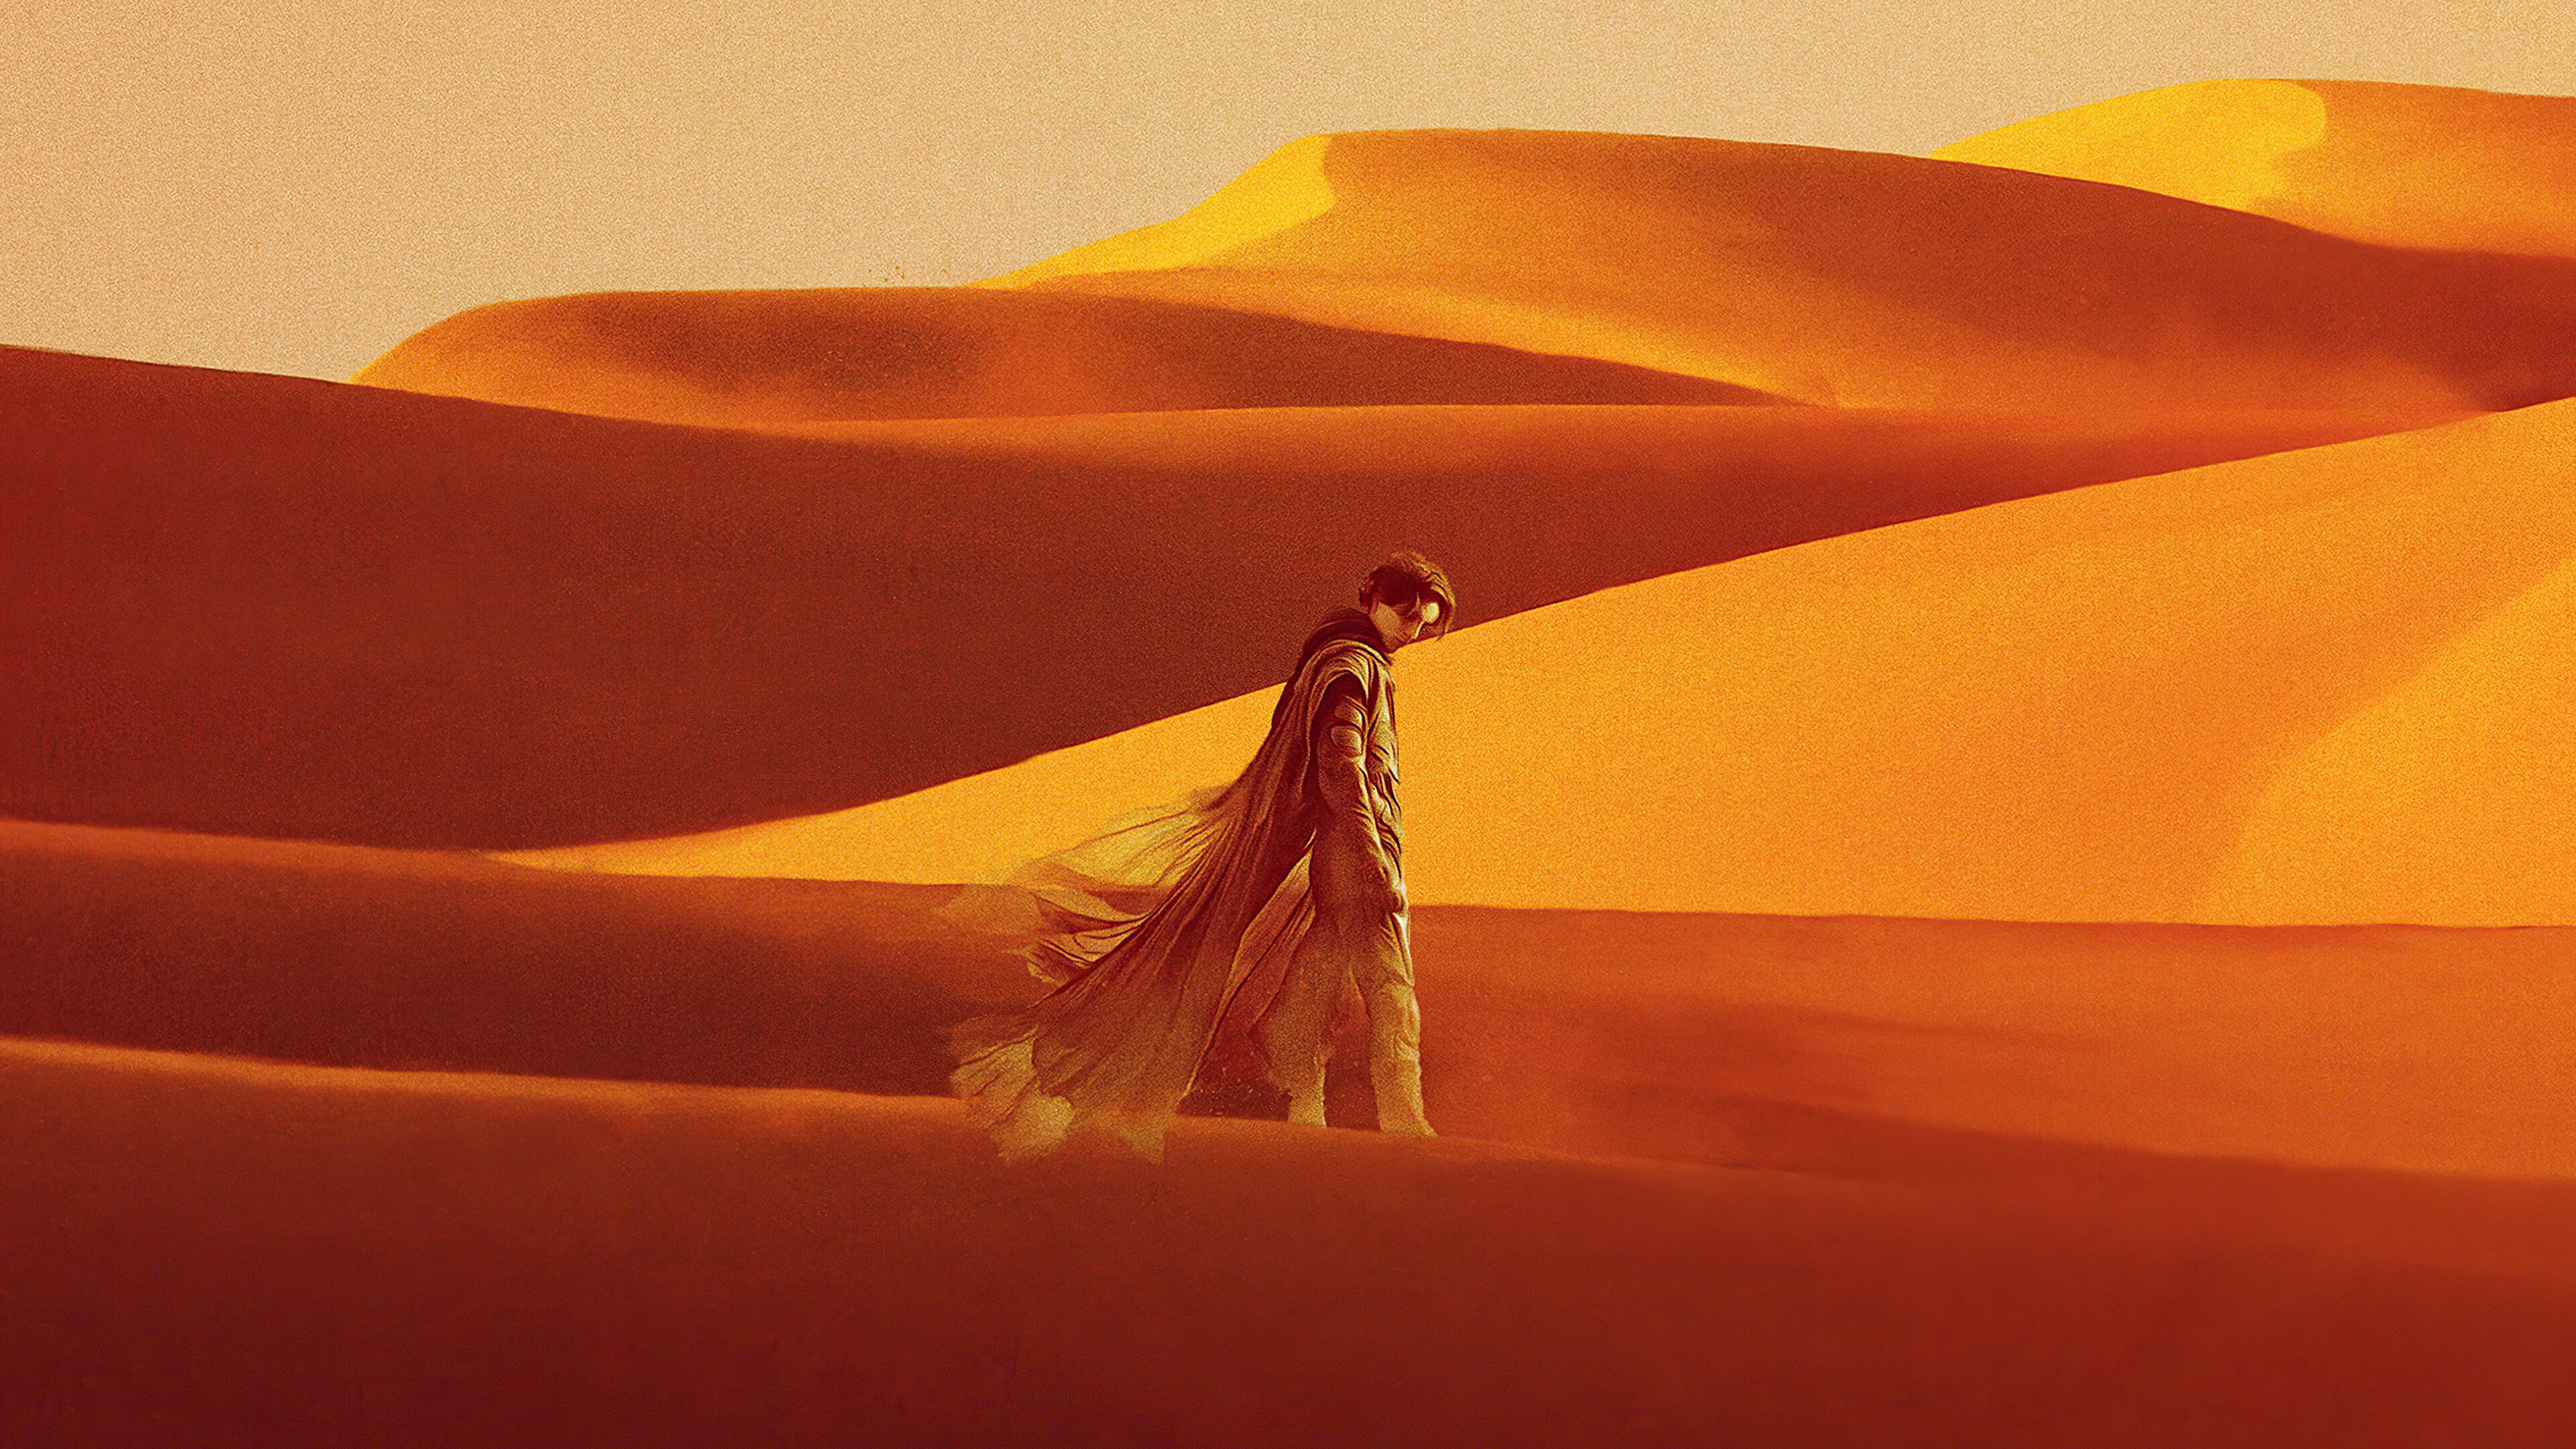 Dune (2021): Among its numerous awards and nominations, it received 10 nominations at the 94th Academy Awards, including Best Picture and Best Adapted Screenplay. 3840x2160 4K Background.